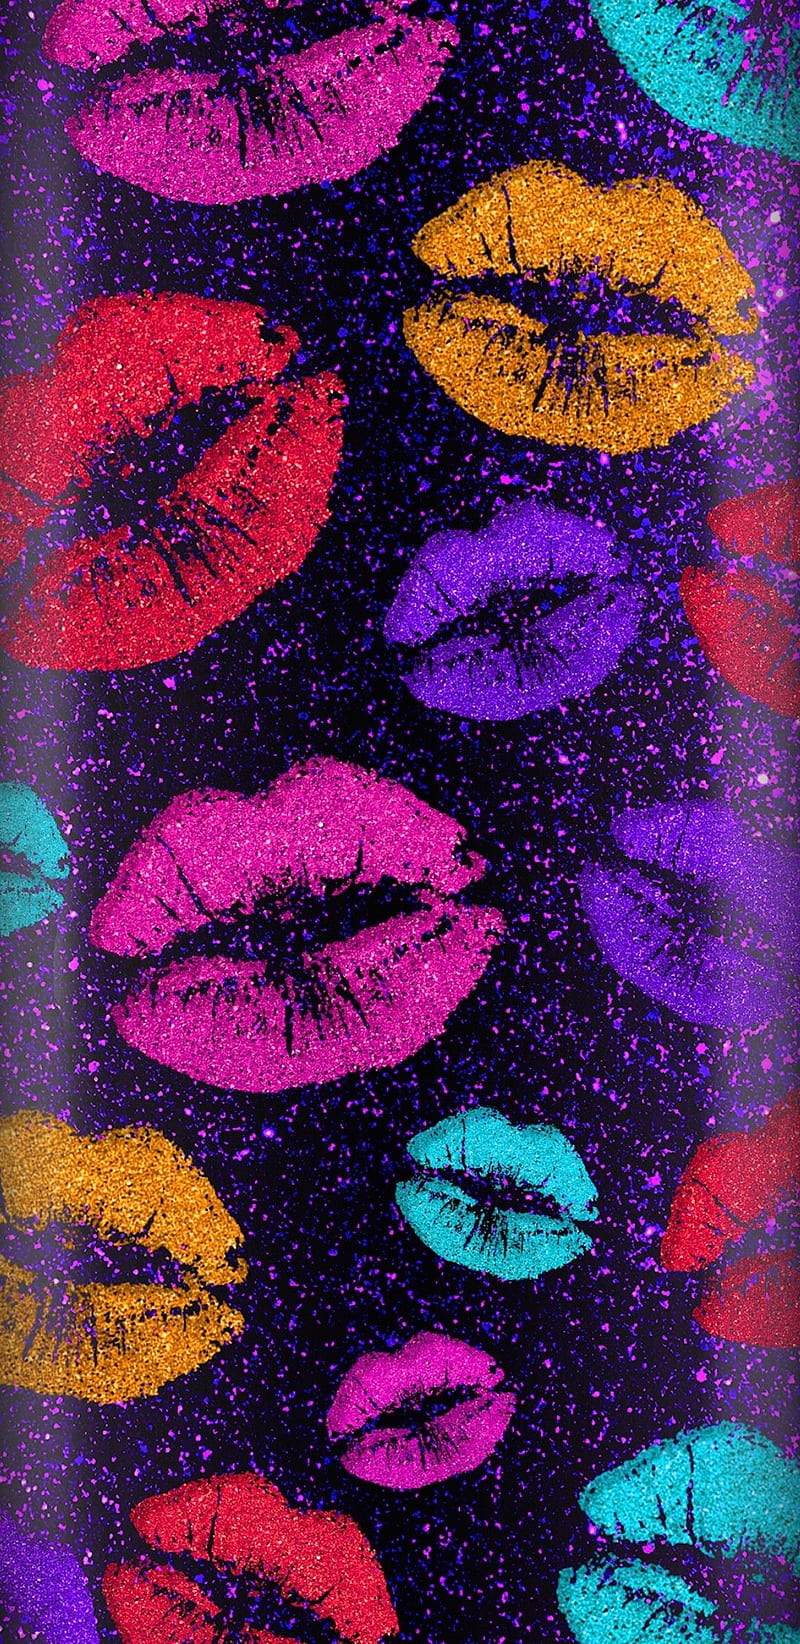 1920x1080px, 1080P free download | Rainbow Kisses, girly, glitter, lips ...